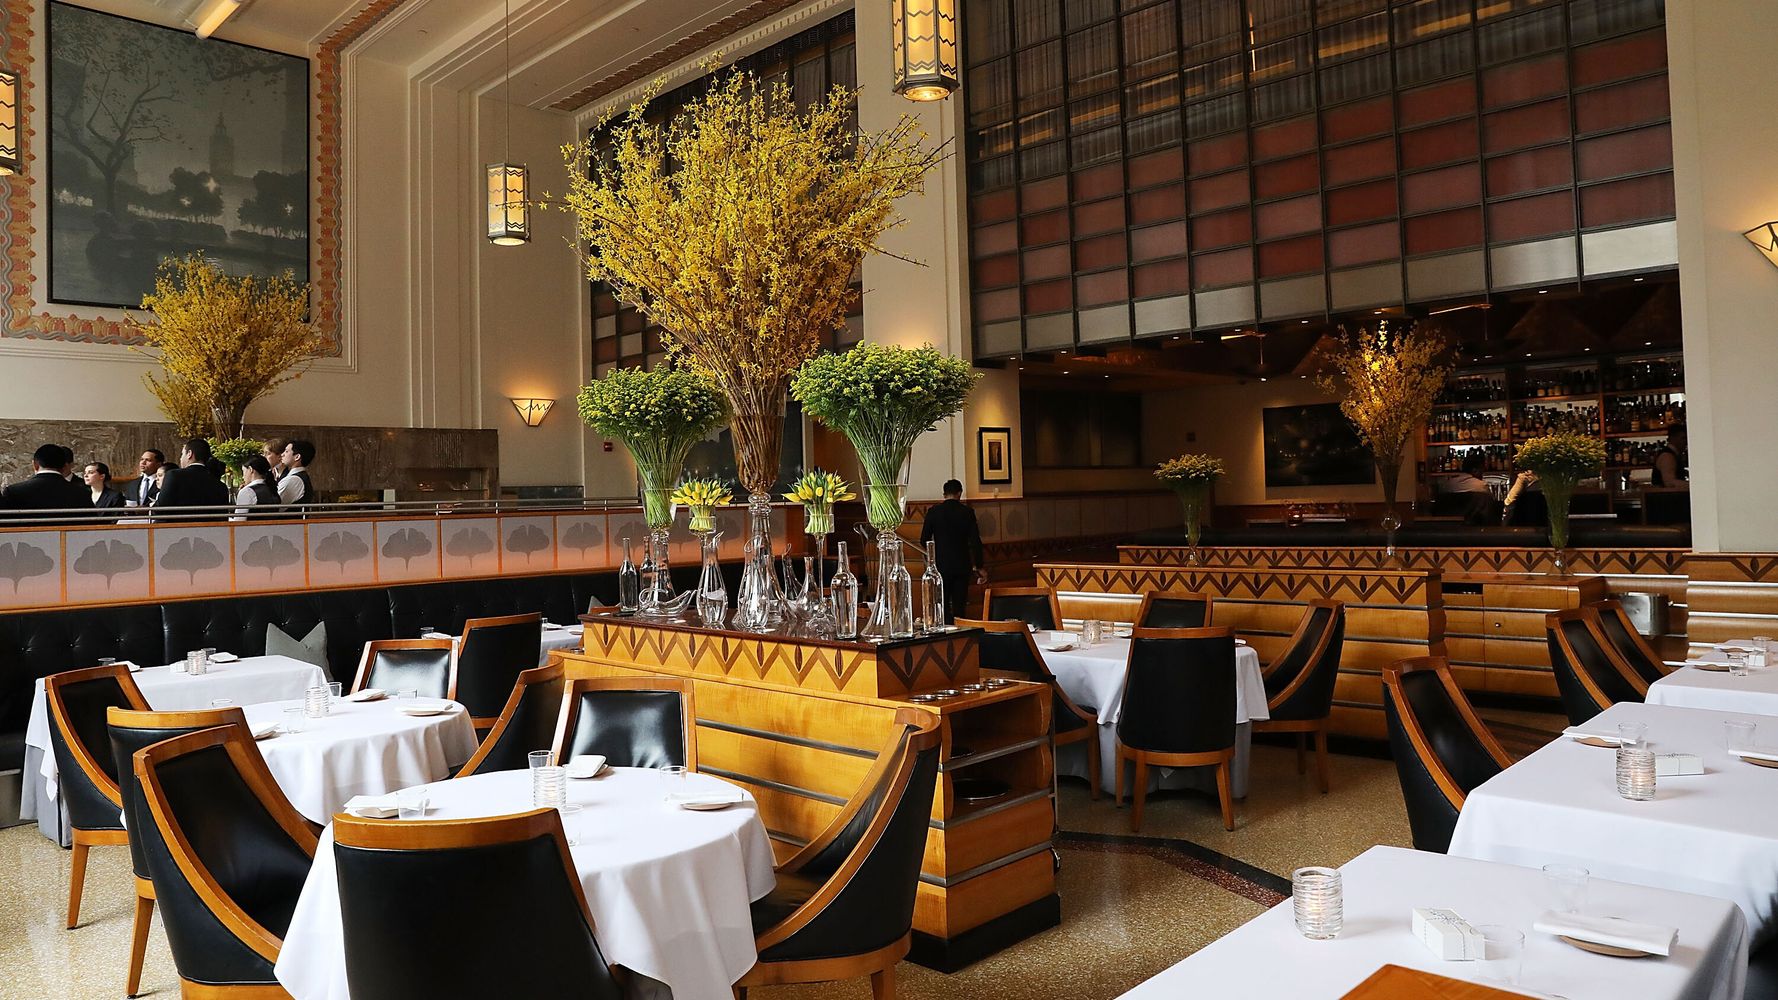 Top Restaurant Eleven Madison Park To Go Meat-Free In Eco-Conscious Bid